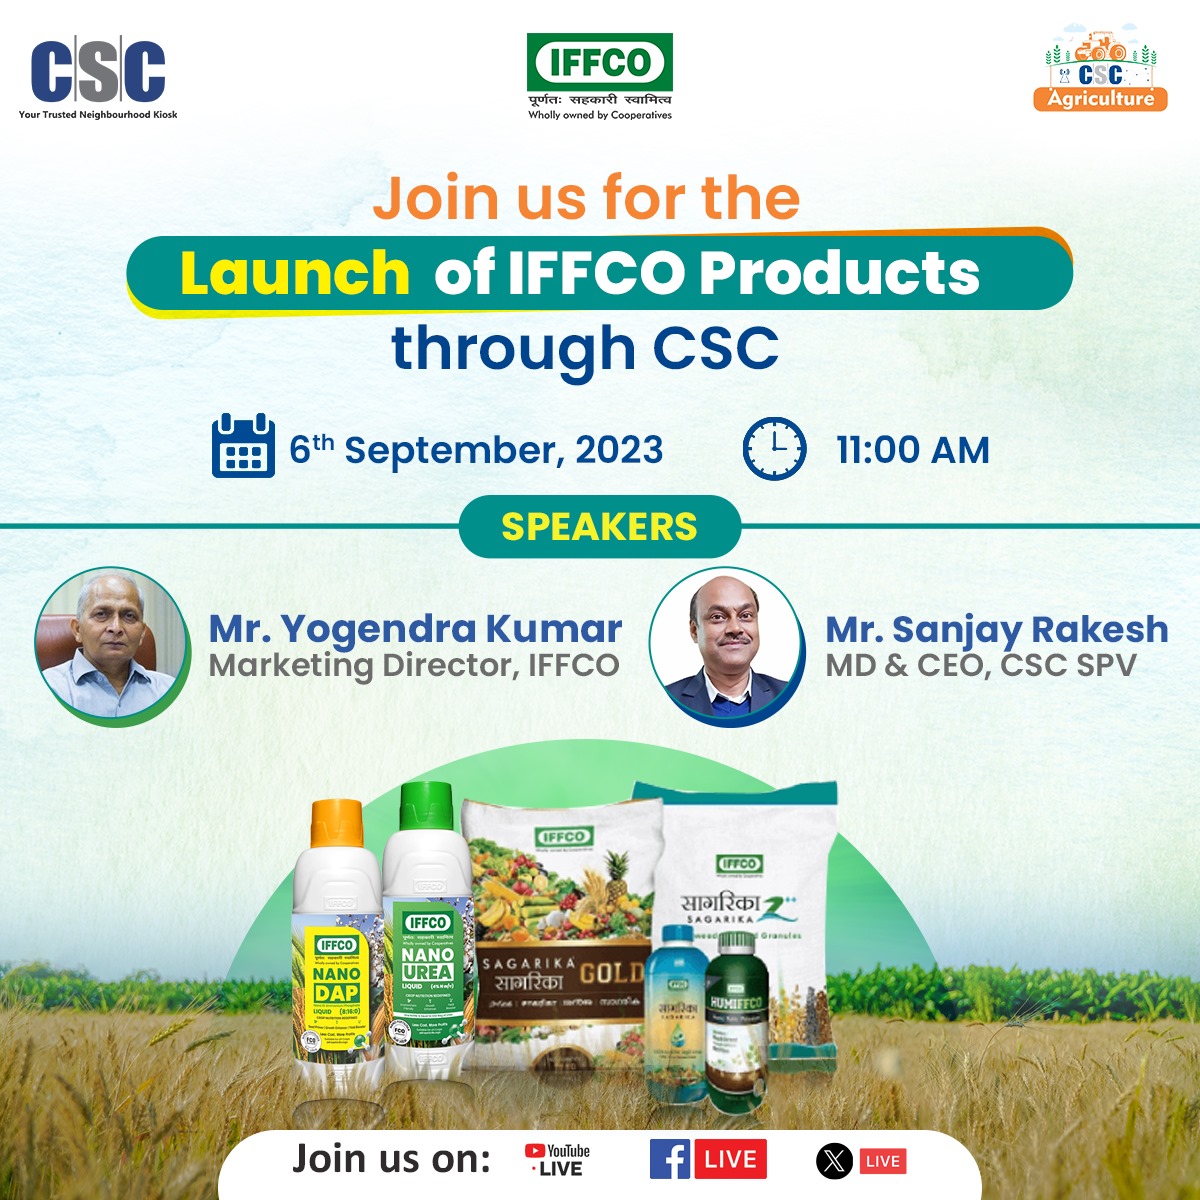 Launch of IFFCO Products through CSC... Join Mr. Yogendra Kumar, Marketing Director, #IFFCO & Mr. Sanjay Rakesh, MD & CEO, CSC SPV on the #CSC Twitter Page, on 6th Sept from 11 AM onwards. #IFFCOProducts #DigitalIndia #RuralEmpowerment #CSCAgriculture #IFFCONanoUrea @IFFCO_PR